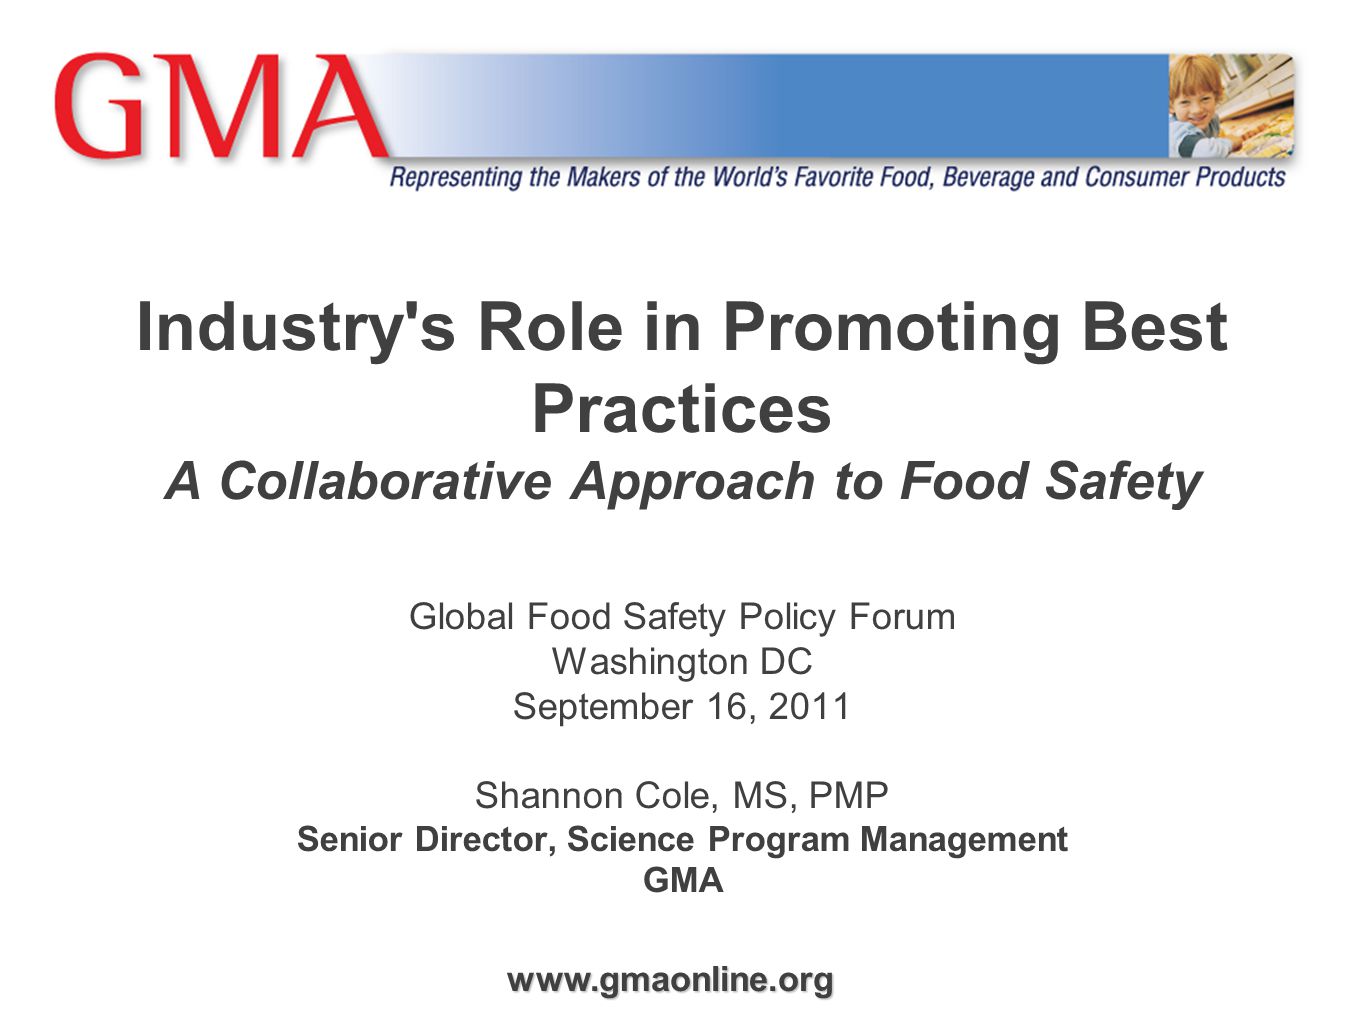 Industry s Role in Promoting Best Practices A Collaborative Approach to Food Safety Global Food Safety Policy Forum Washington DC September 16, 2011 Shannon Cole, MS, PMP Senior Director, Science Program Management GMA